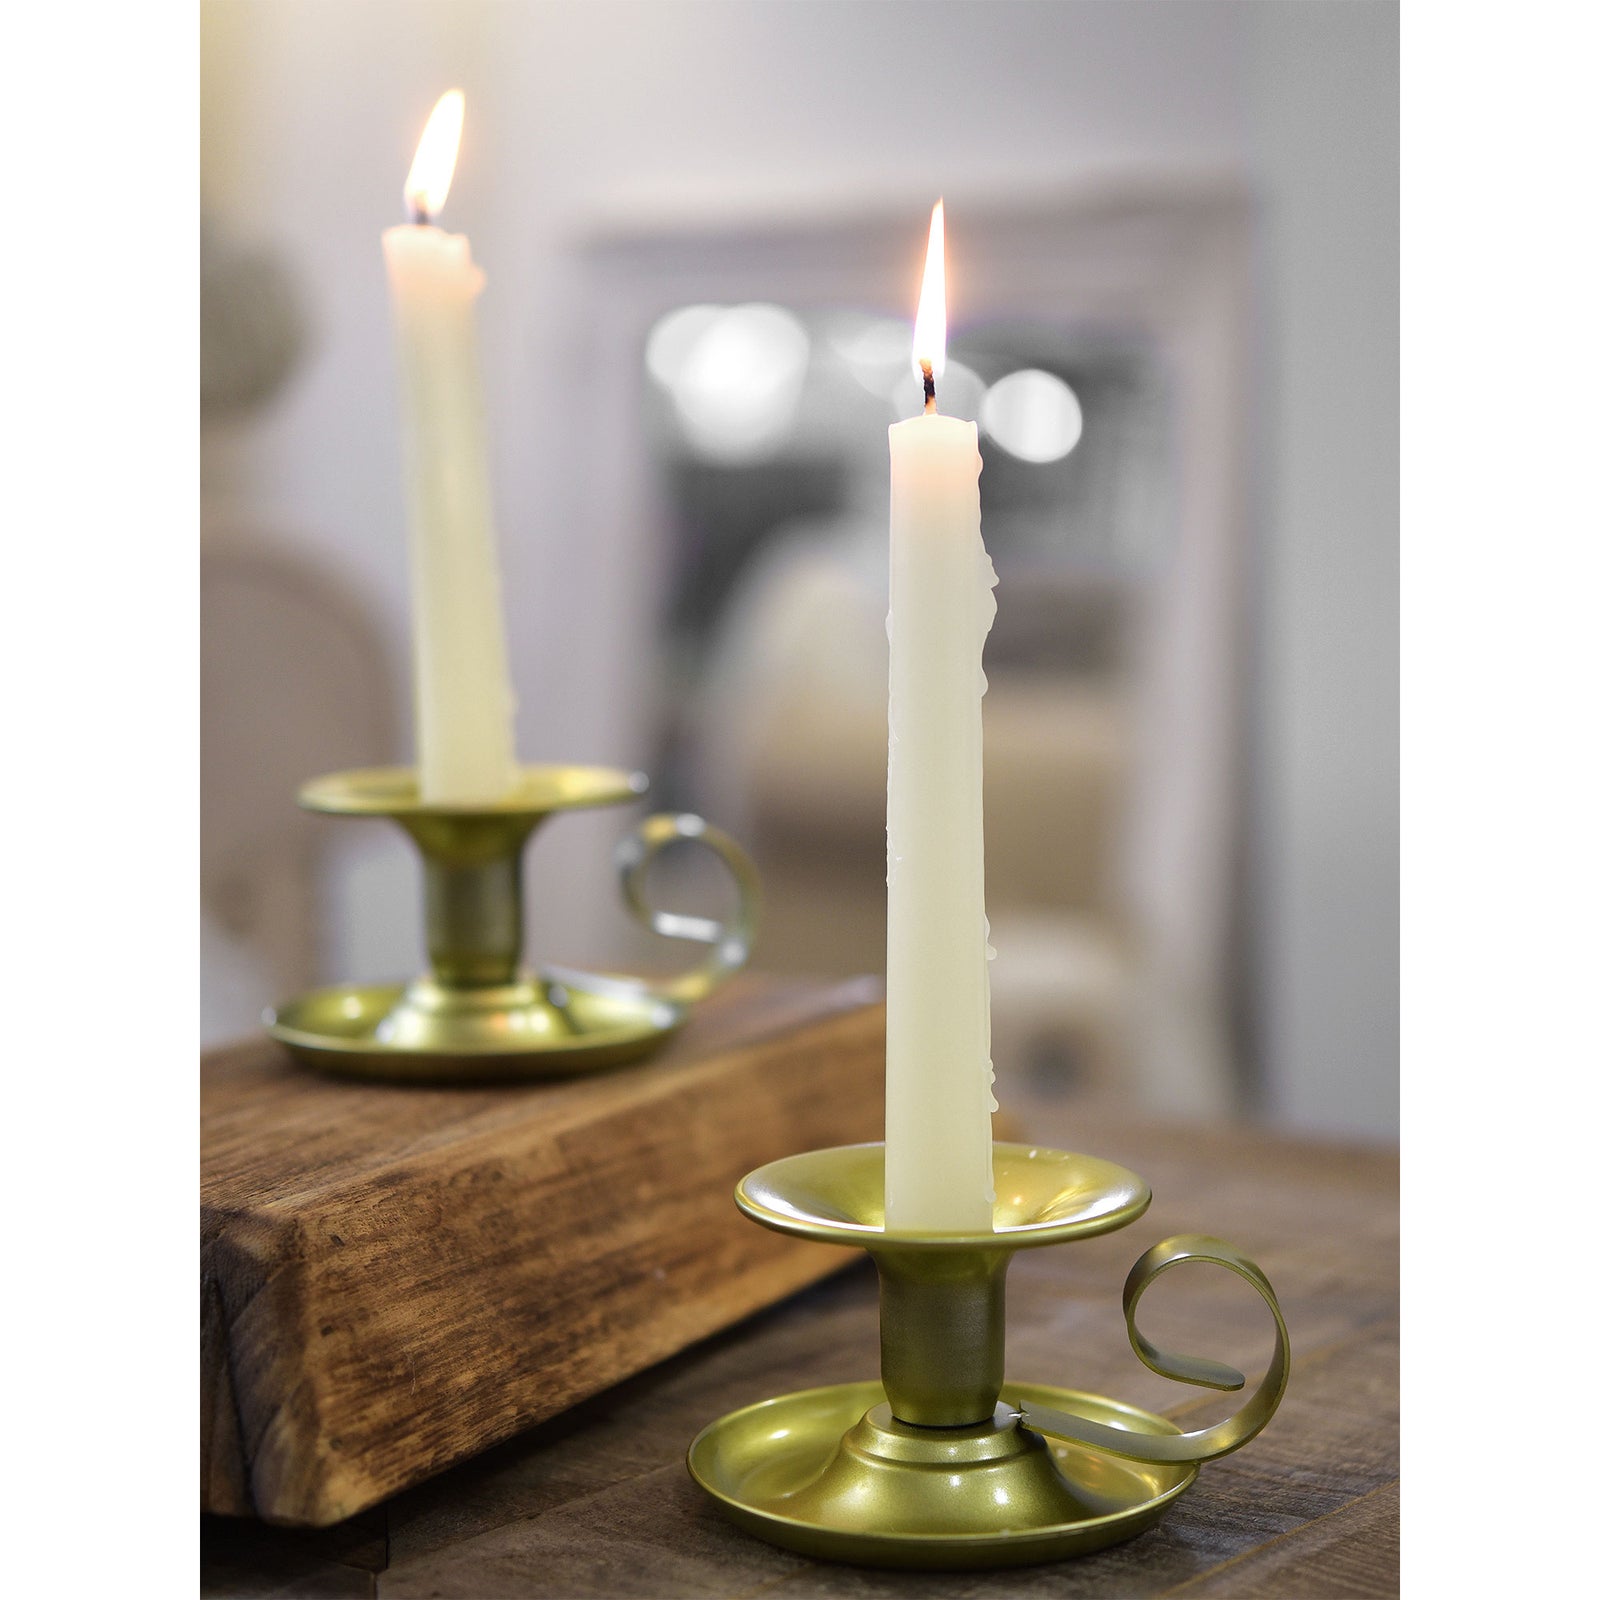 2 Gold Plated Iron Saucer Vintage Iron Candle Holders with Handle for Taper Wax Candlesticks